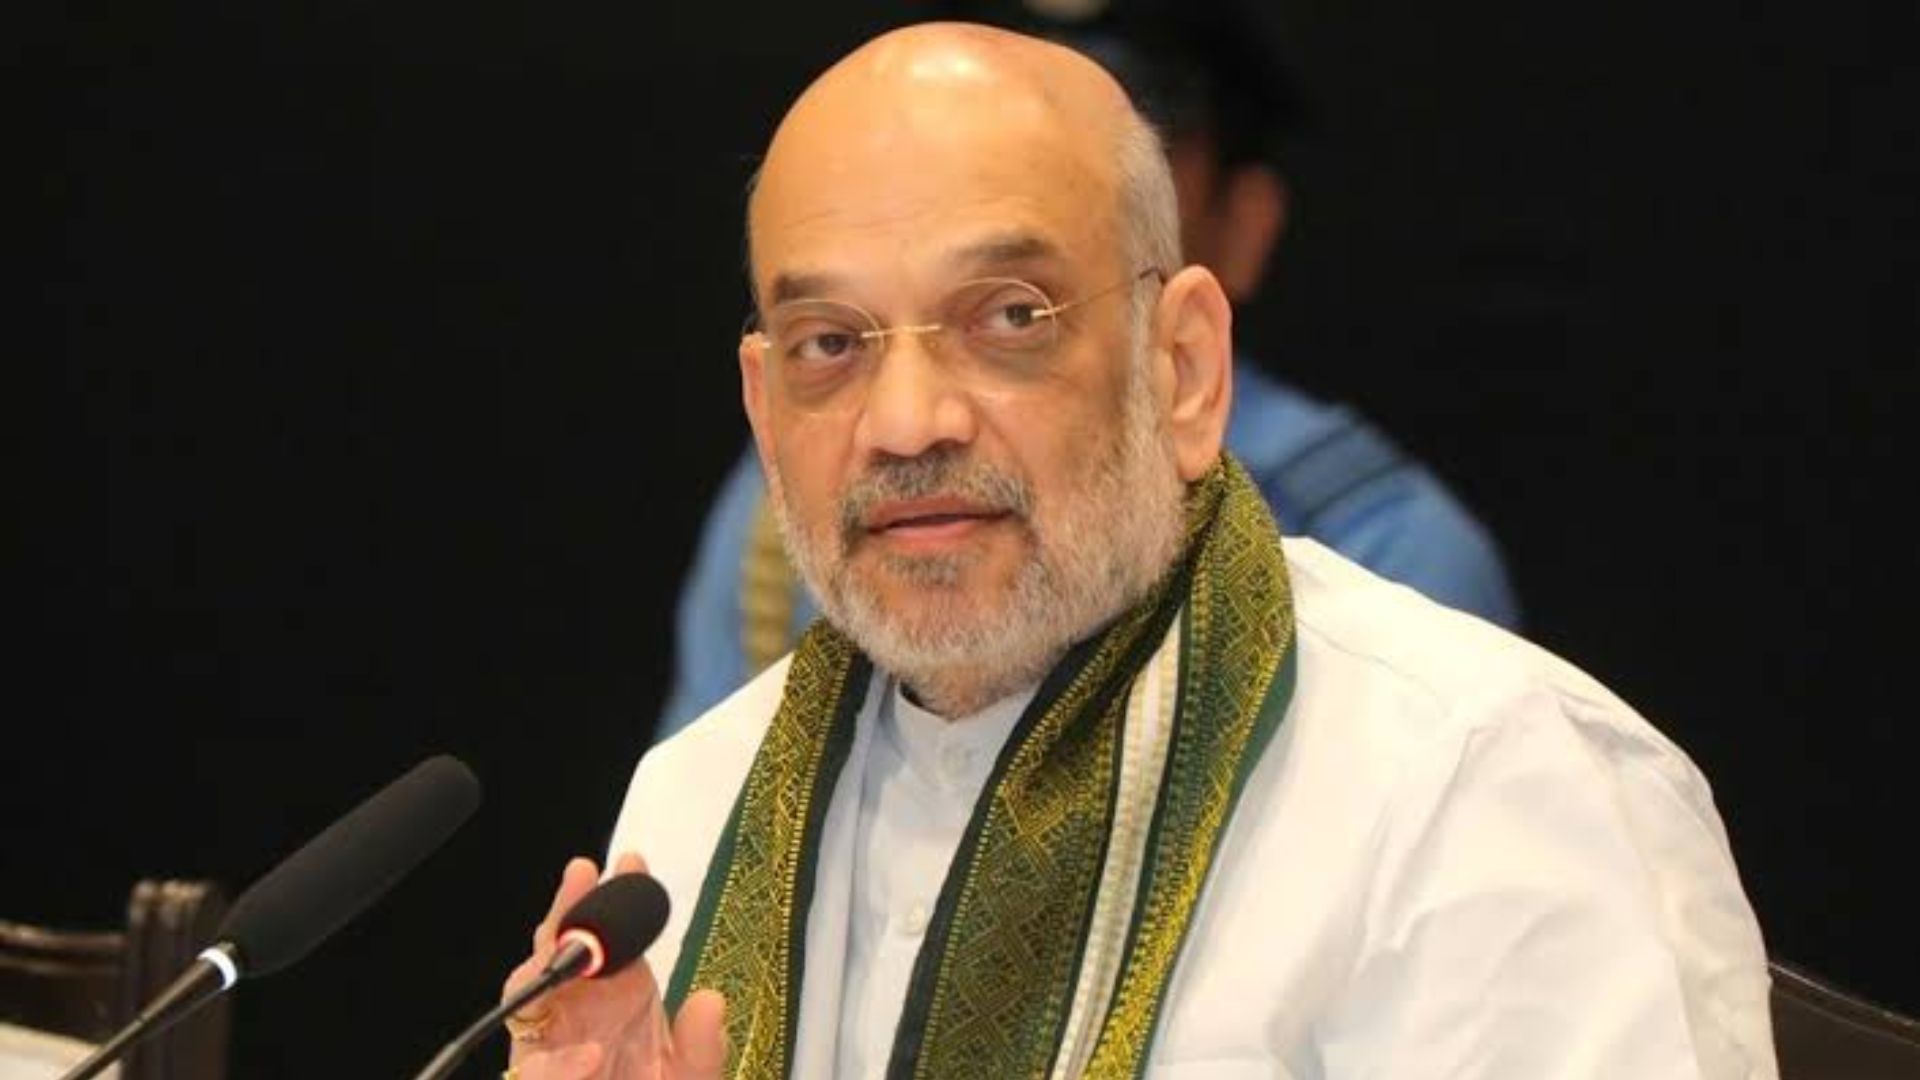 Home Minister Amit Shah to kickstart BJP’s LS polls campaign with Bikaner rally today